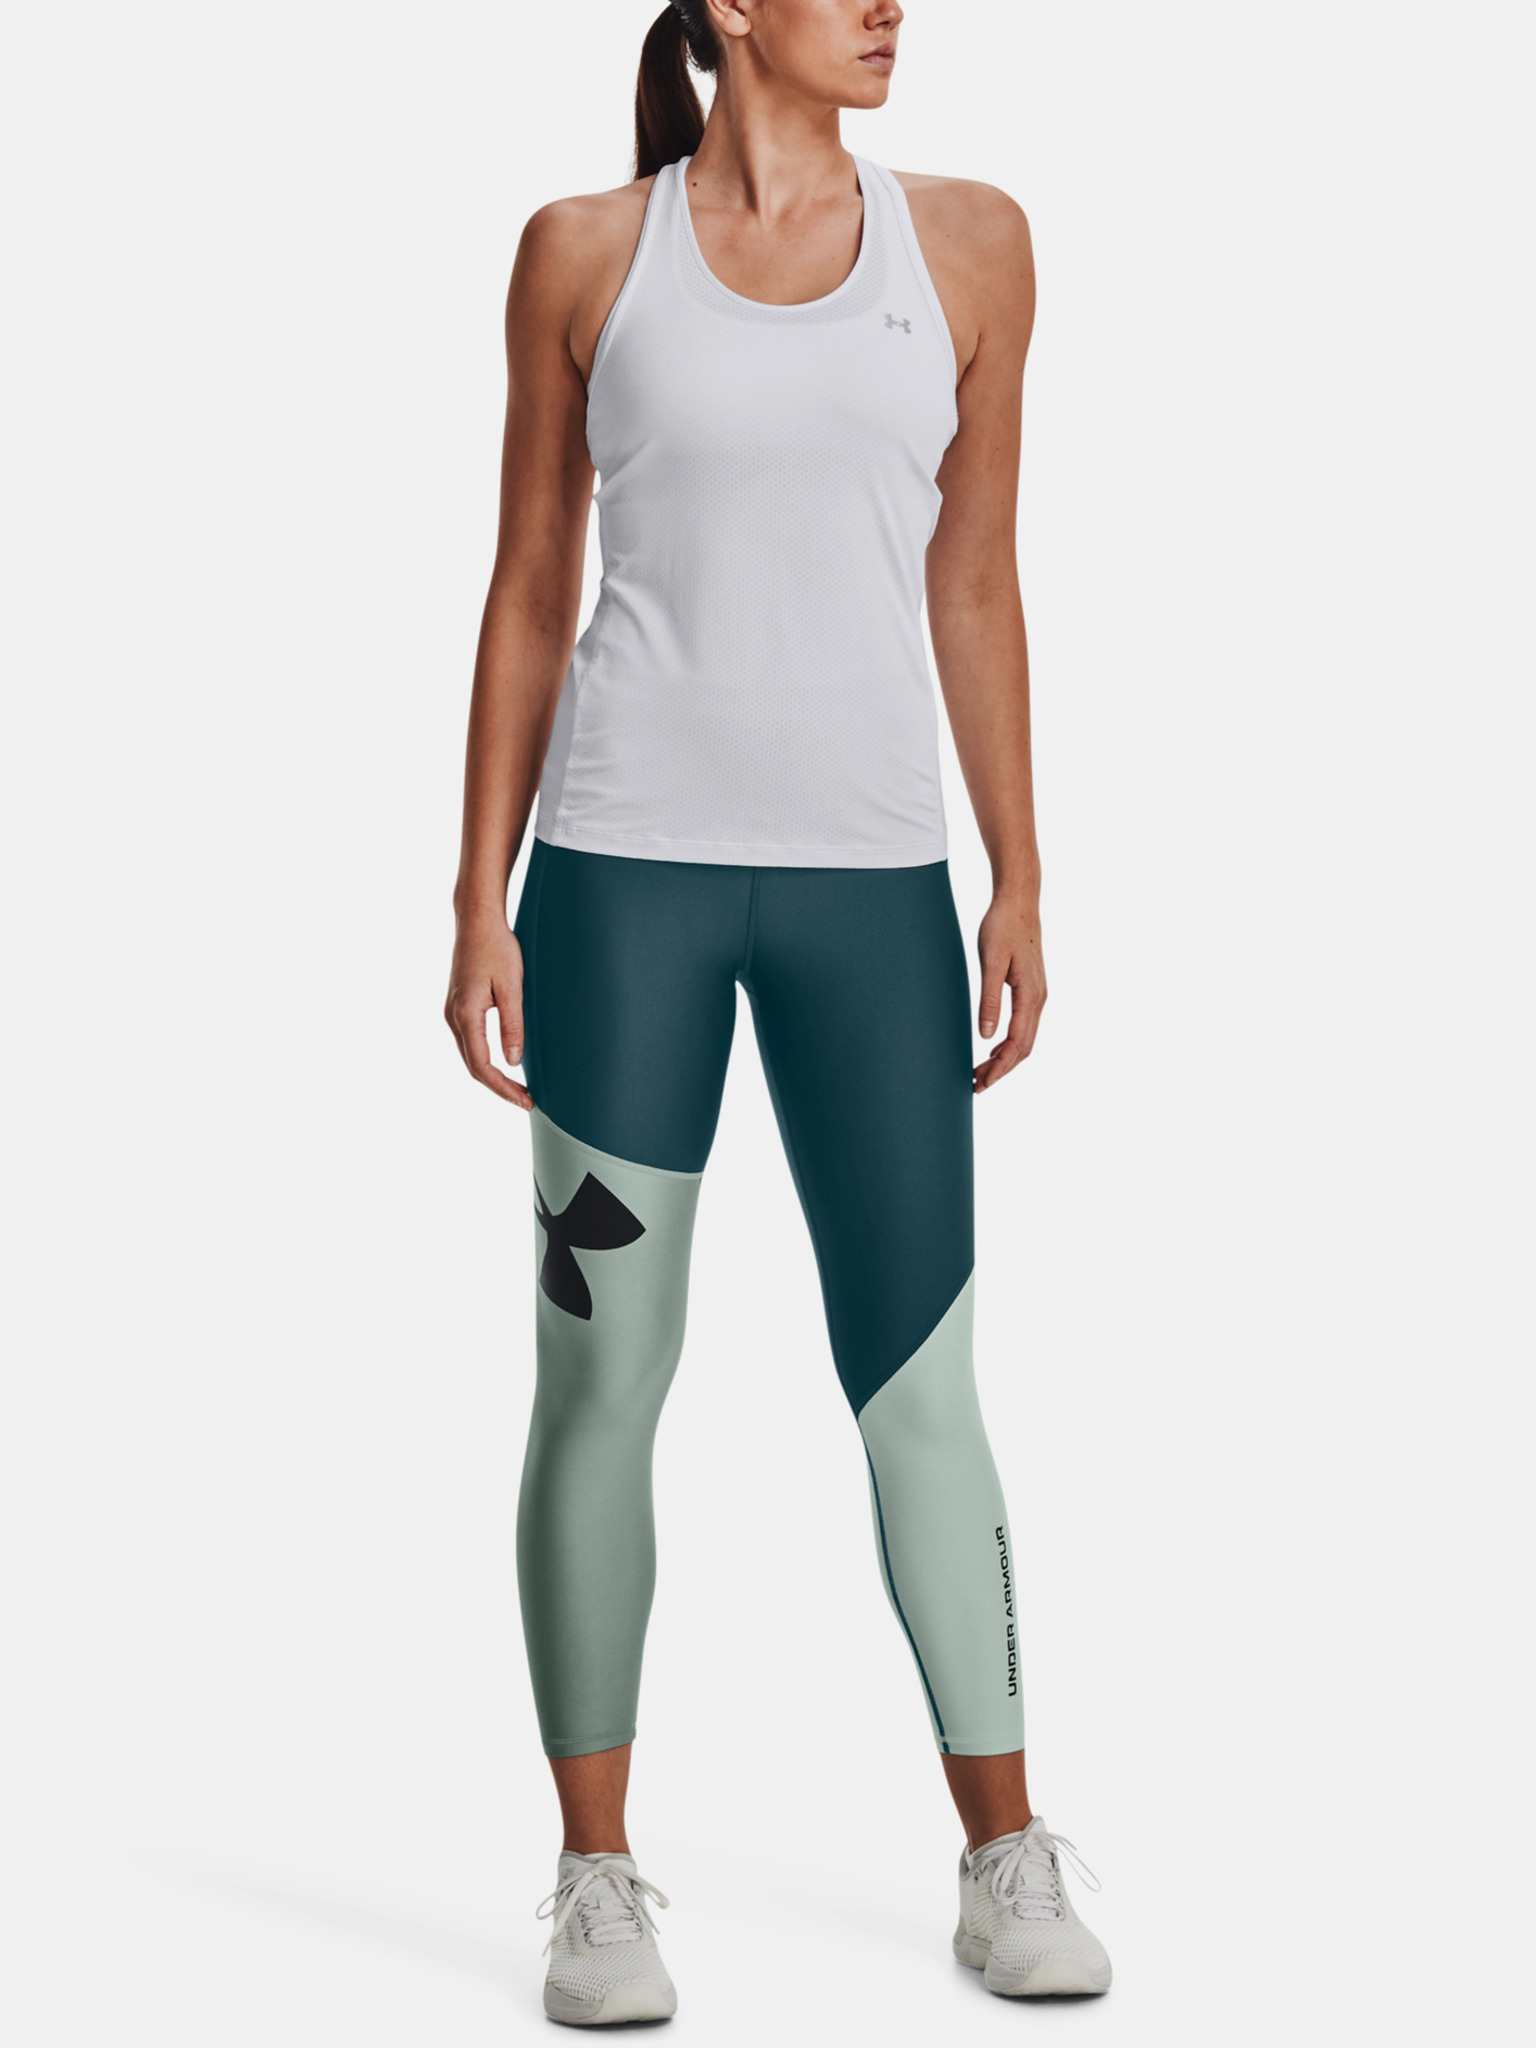 UNDER ARMOUR Women's Armour Ankle Compression Leggings NWT Silica Green  MEDIUM